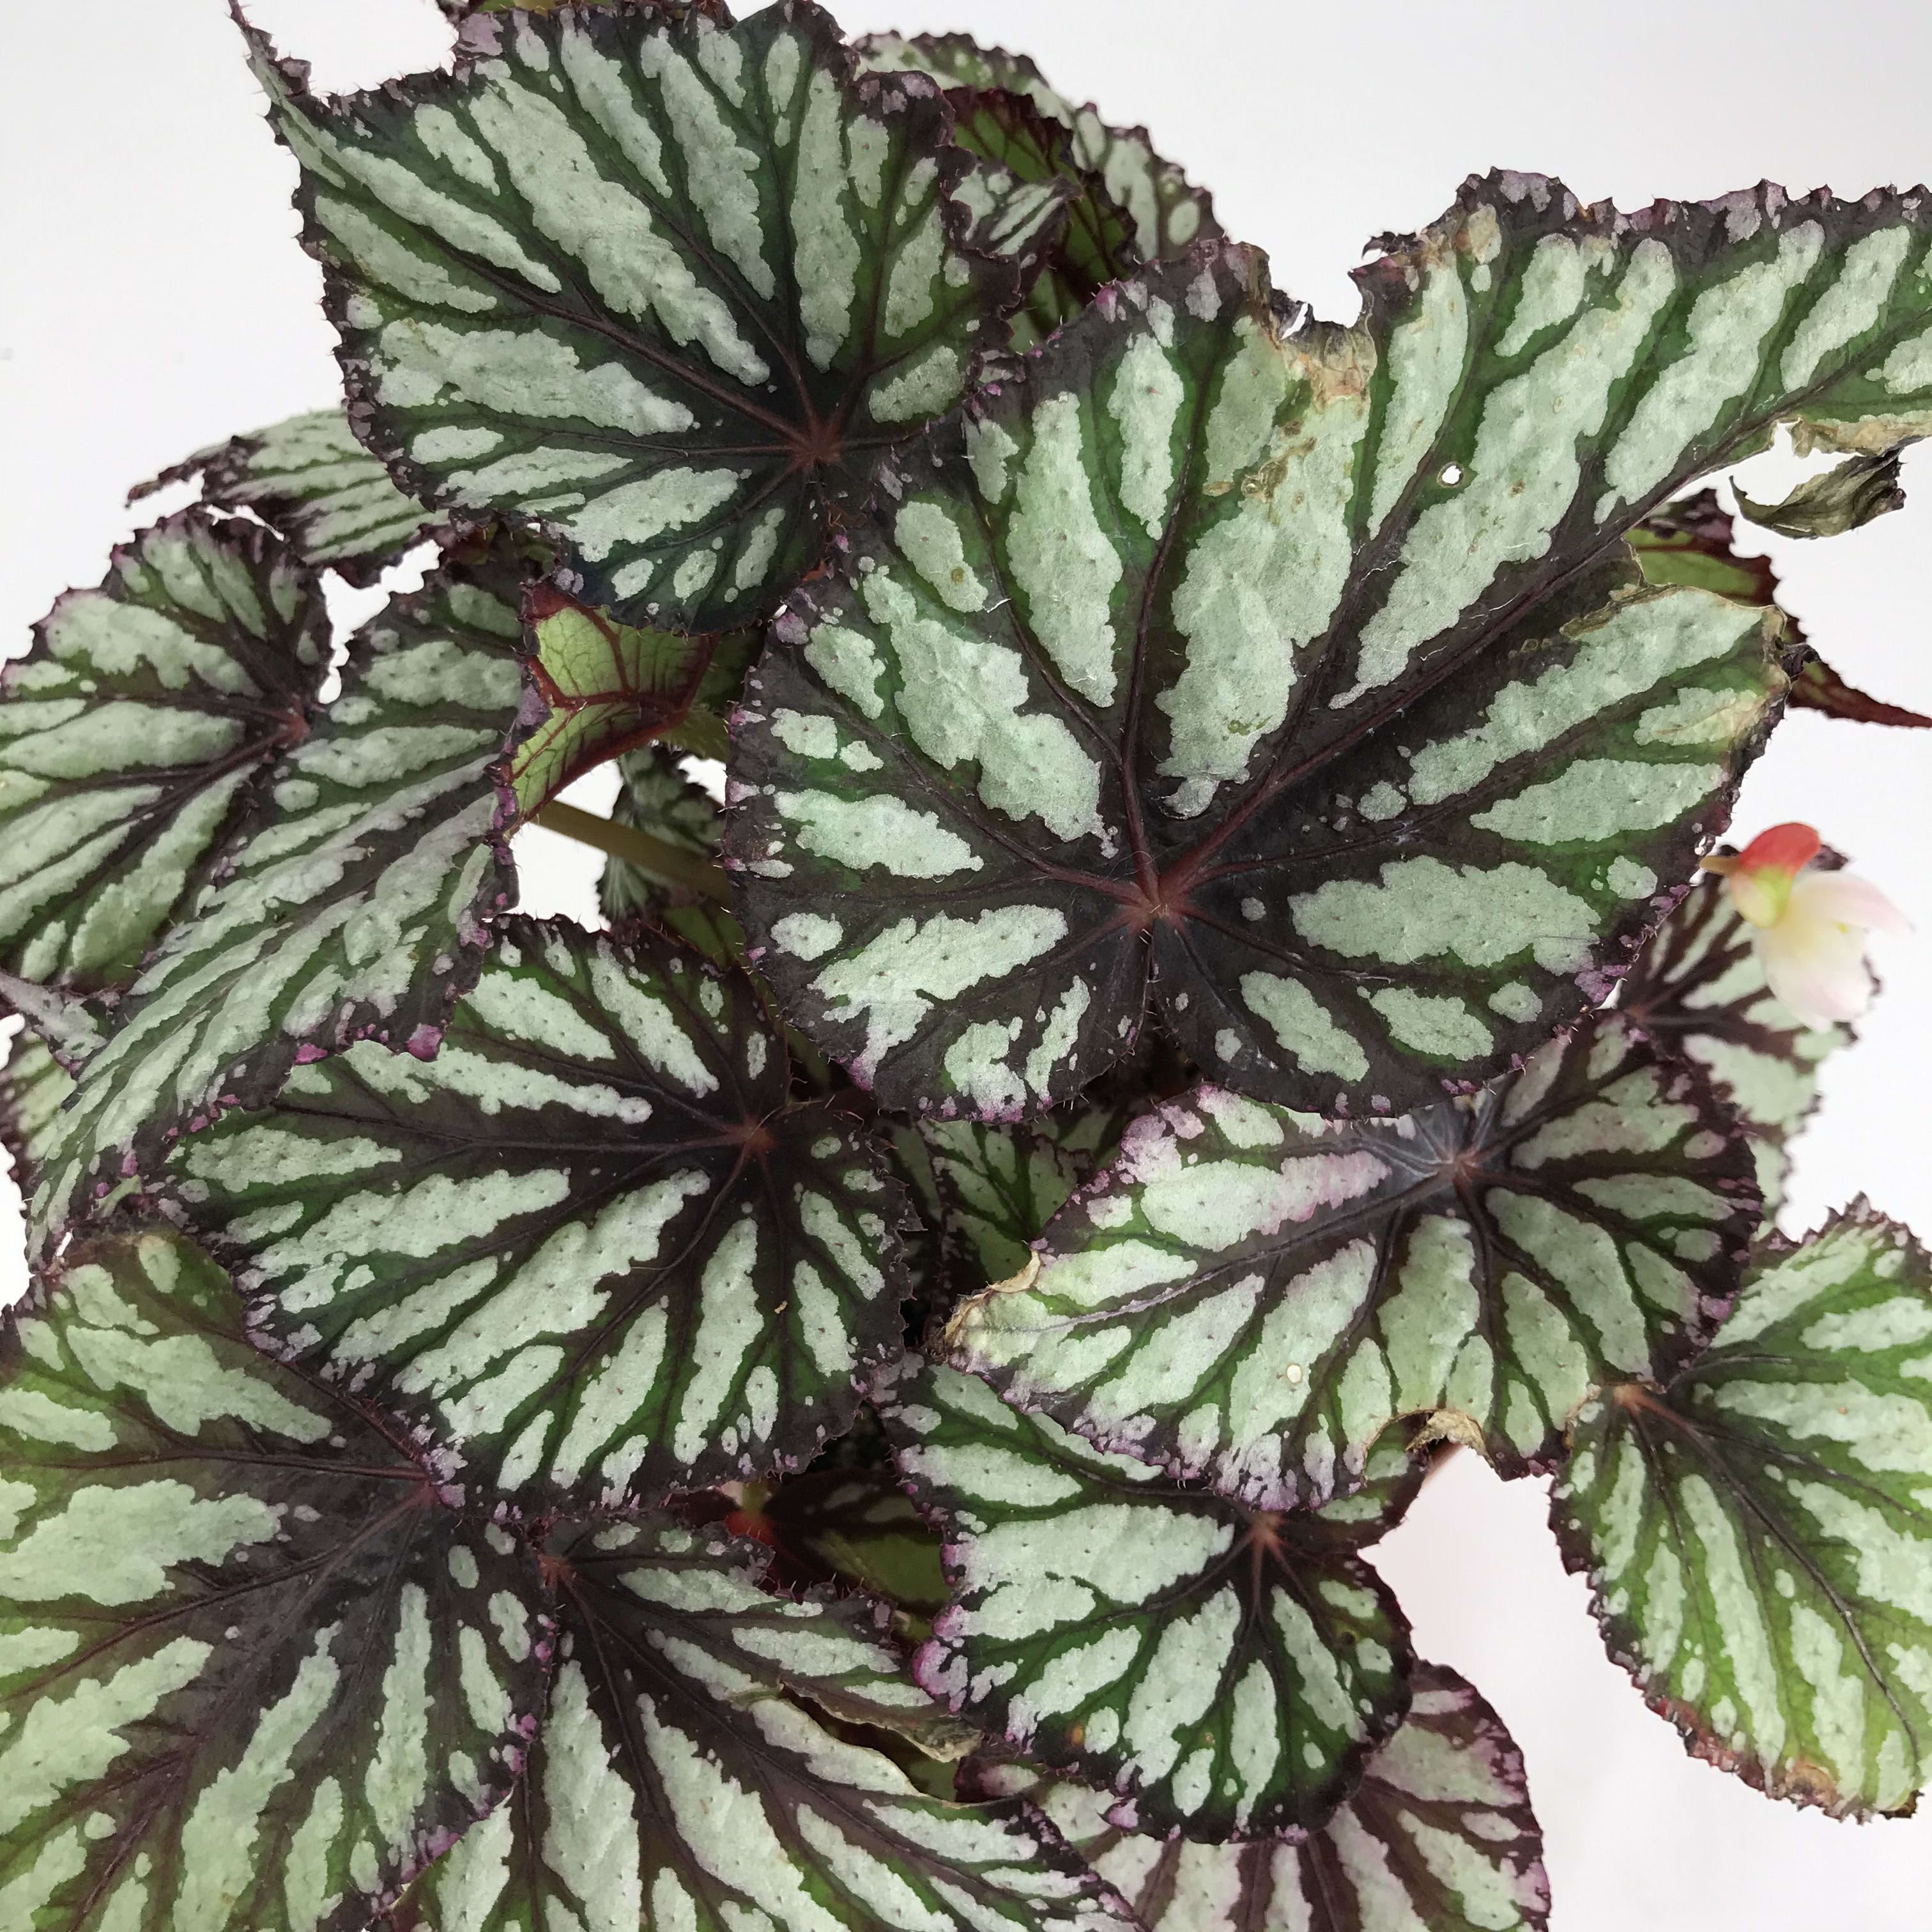 Rex Begonia 6&quot; - The fabulous foliage of Rex begonias offers a large range of colors, shapes, and textures. The flowers are small, but with leaves like these, who cares? Rex begonias headline the show for months on end in any shade garden, especially when grown in containers. These plants prefer shaded, humid conditions and rich, aerated soil like that found on the forest floor. Comes in a grower's pot. Choose &quot;DELUXE&quot; for a decorative ceramic pot.